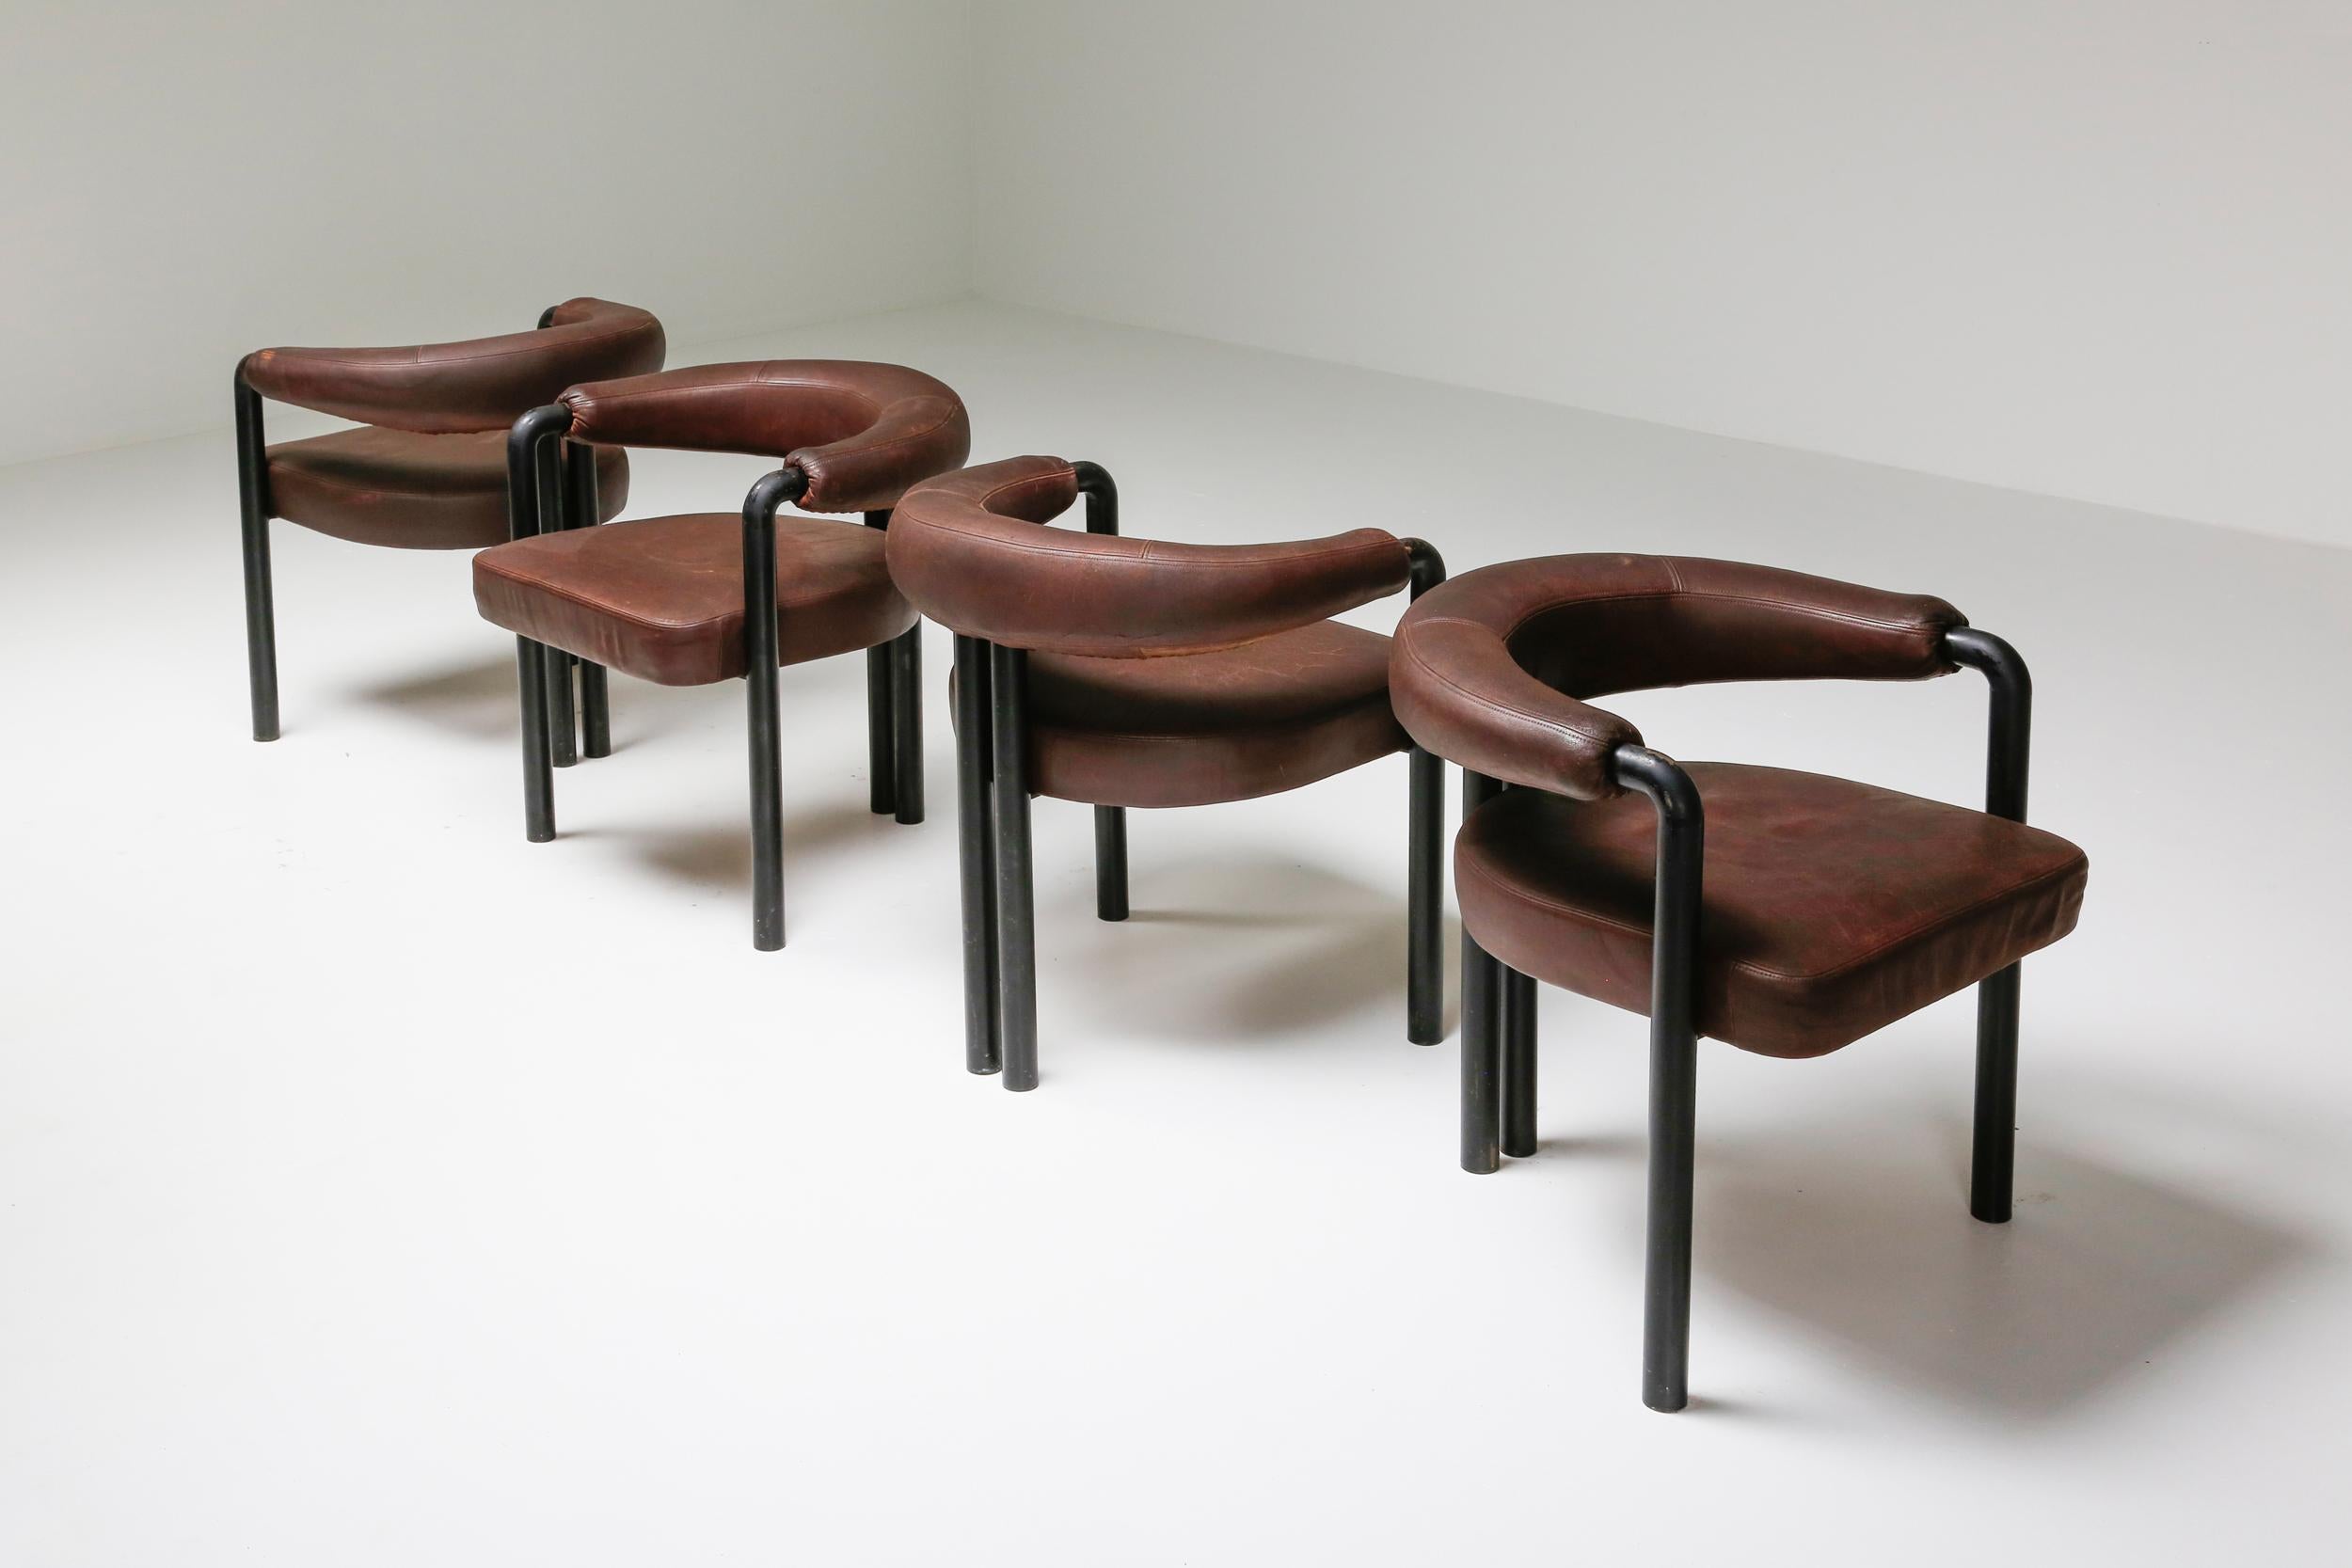 Mid-Century Modern armchairs, De Sede, Switzerland, the 1960s, brown leather, black steel; Modernist: Italian design inspired; Scarpa; 

Modernist inspired armchairs, simple in design and outstanding in comfort. Similar to this chair are the